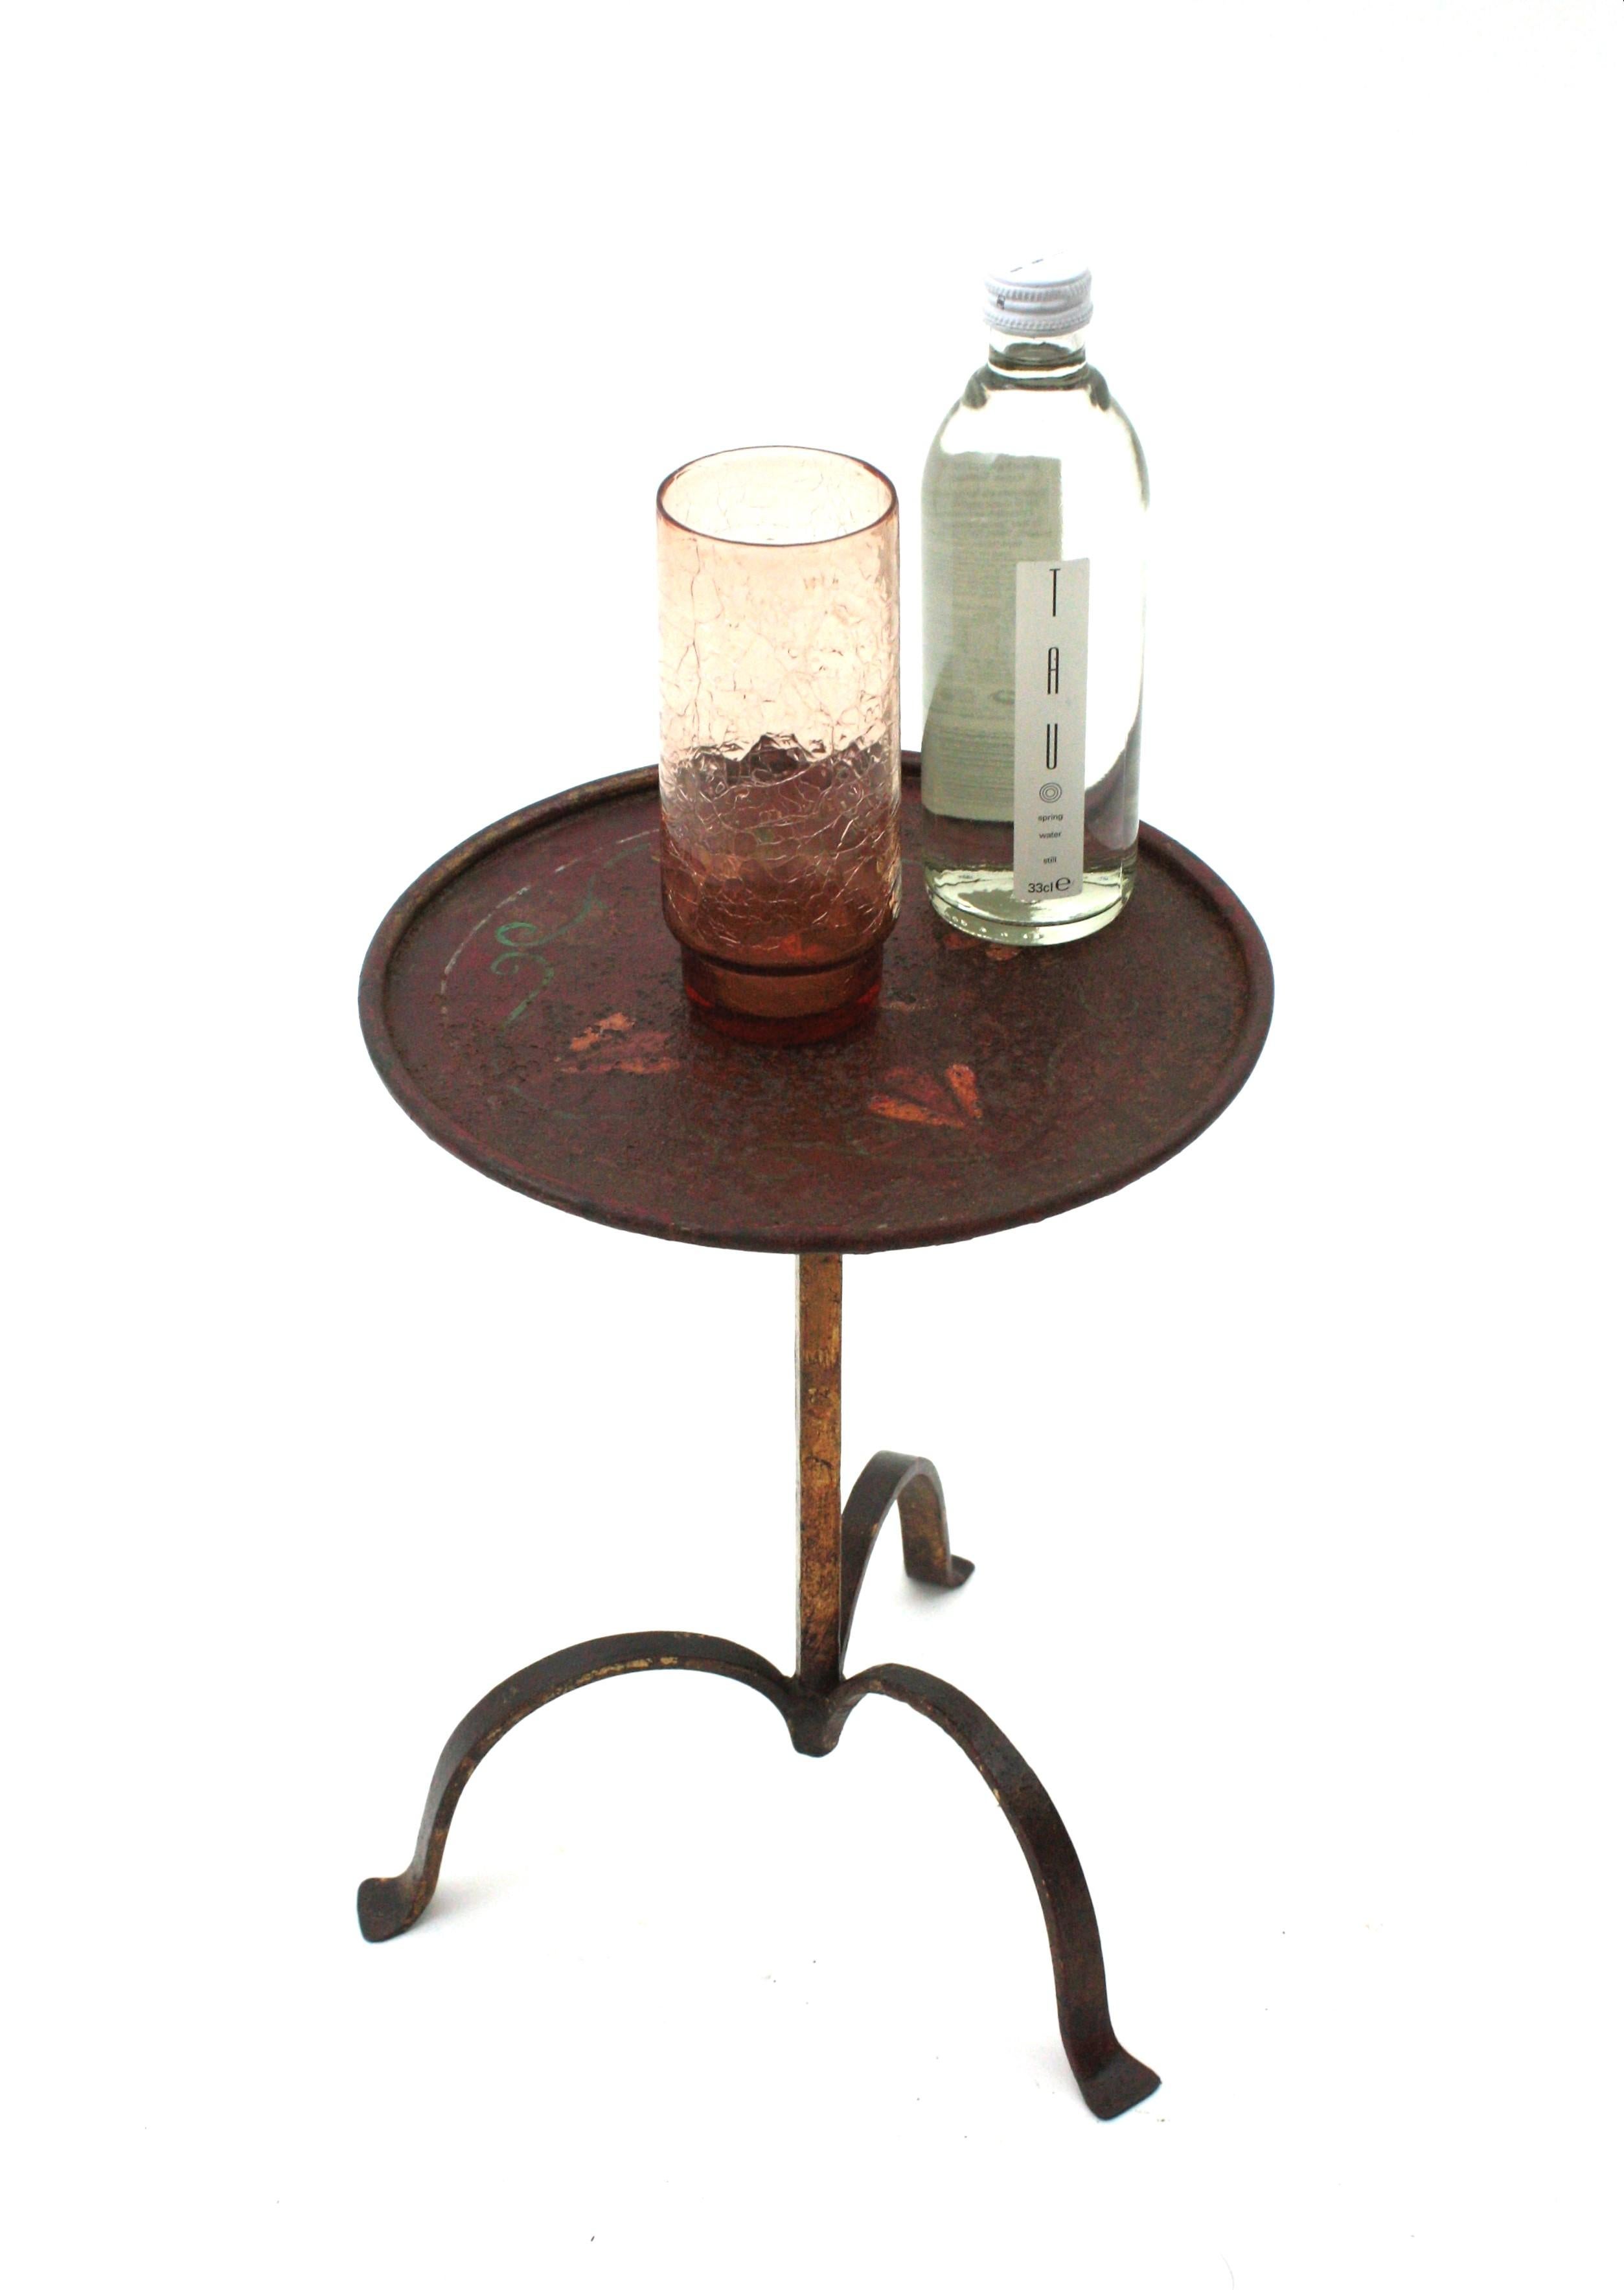 Spanish gilt wrought iron drink / cocktails table with polychromed top, Spain, 1940s.
Handcrafted in wrought iron with gilt finish on the base. The round top has hand-painted floral decorative details and a terrific aged patina in redish color with